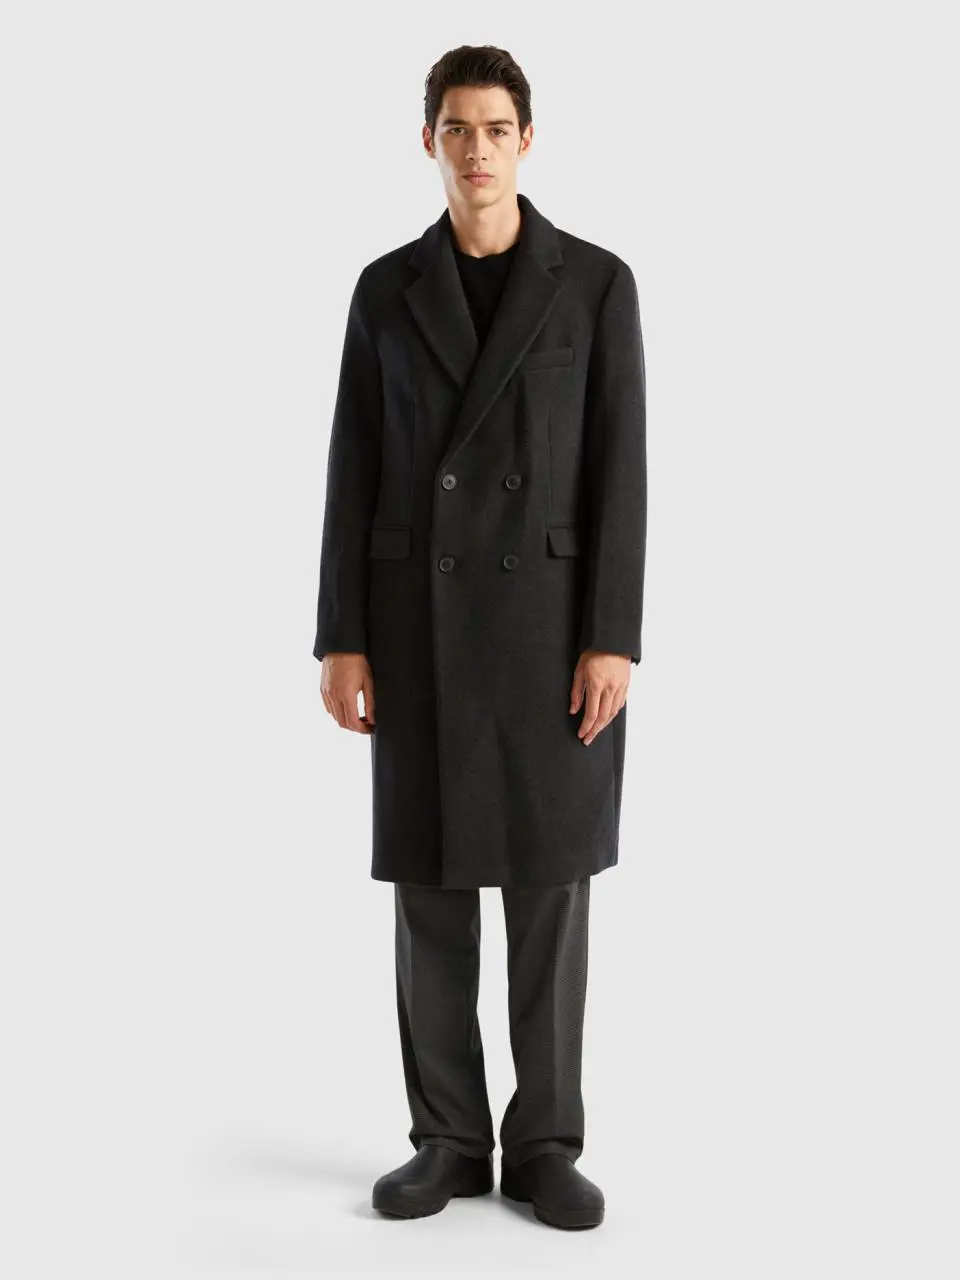 Benetton double-breasted slim fit coat. 1